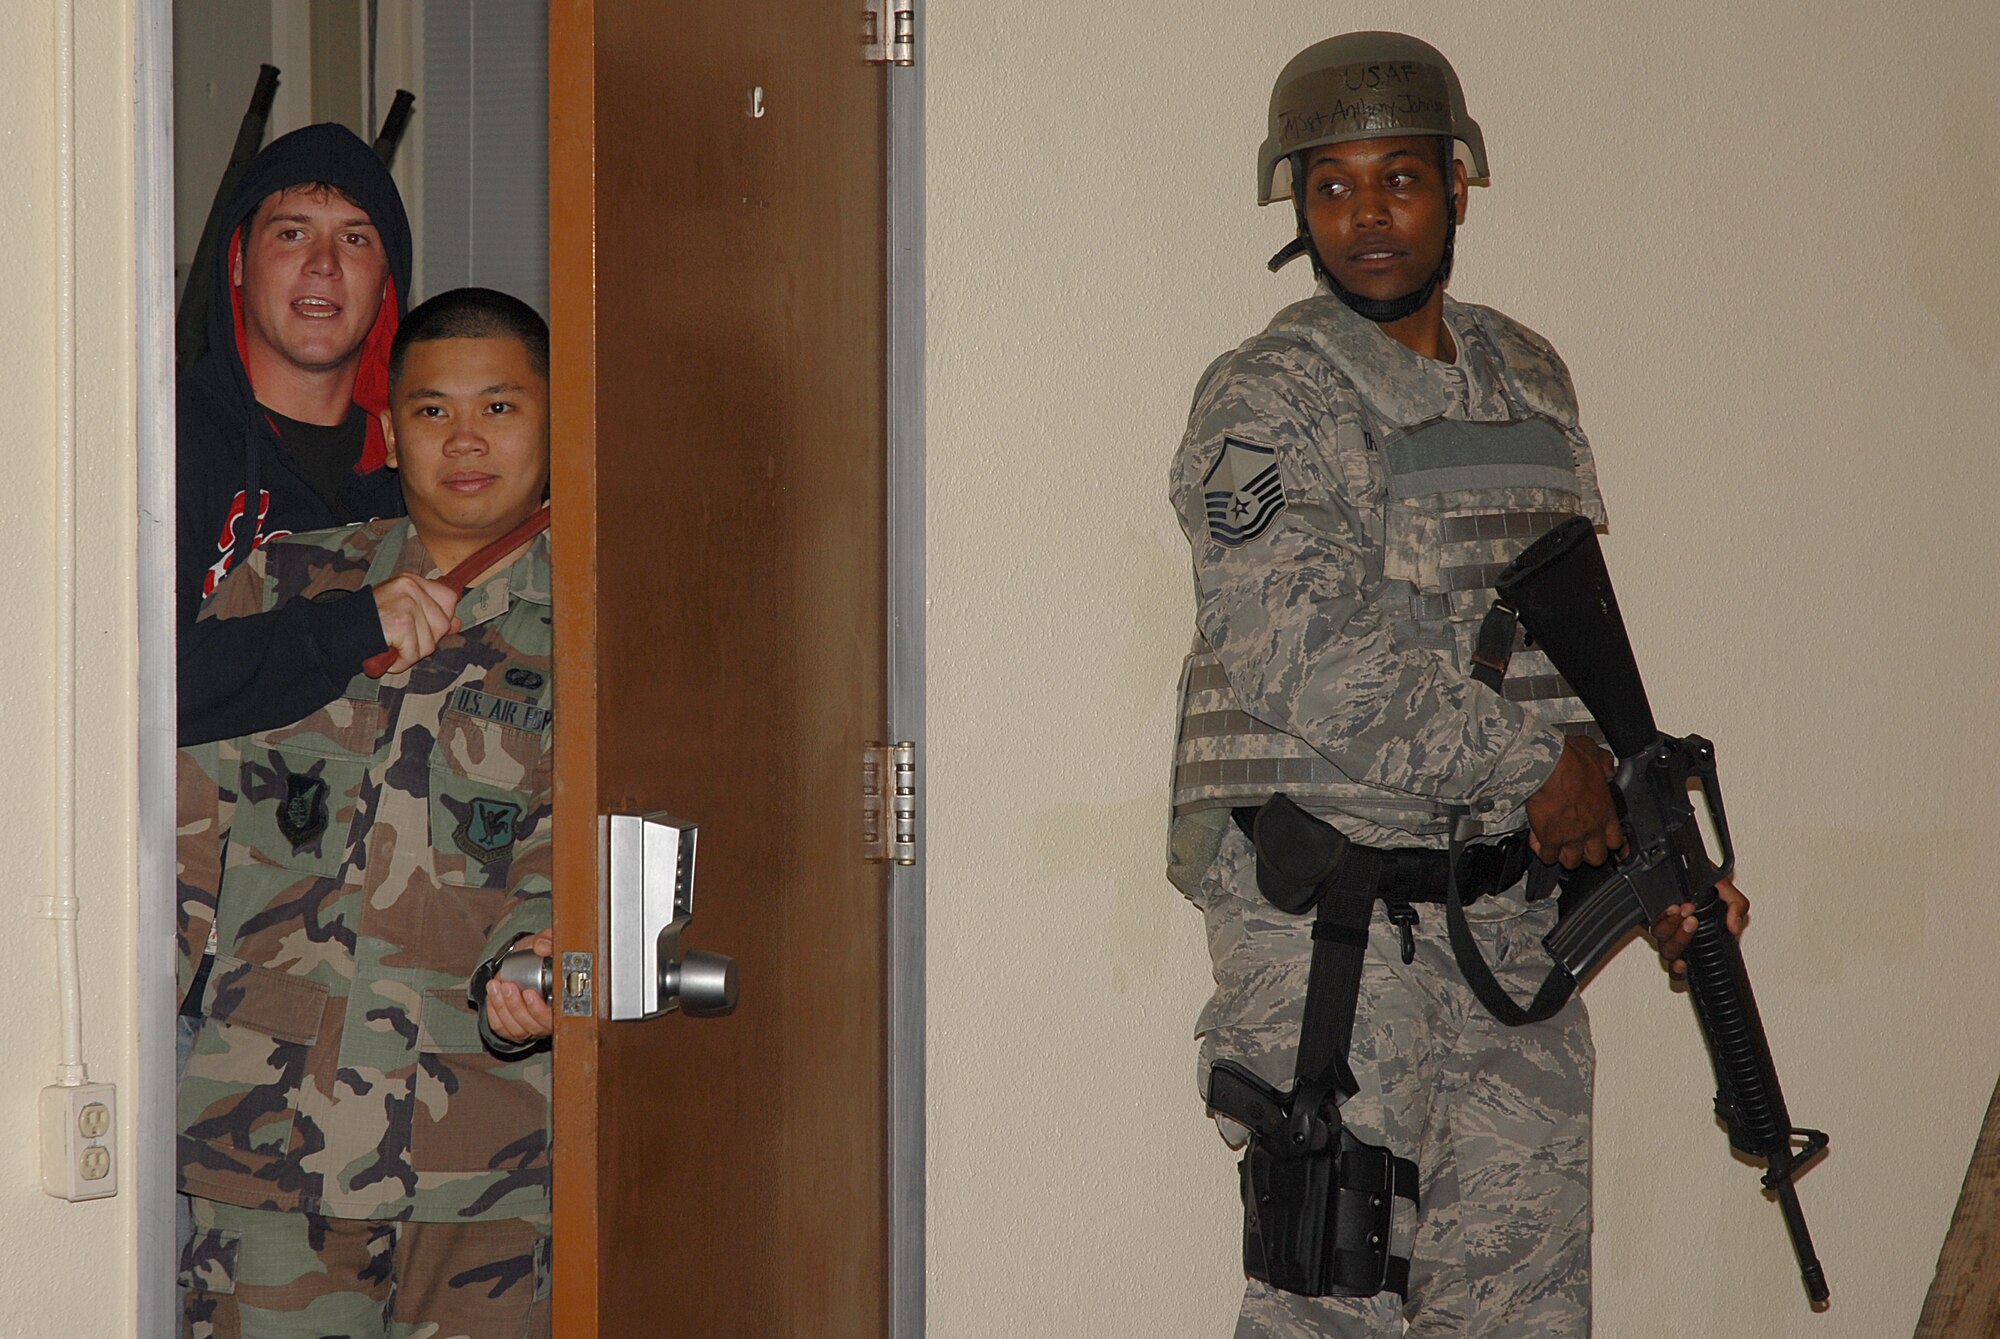 Master Sgt. Anthony Johnson, 18th Security Forces Squadron, hides behind the door as the perpetrator of a hostile situation scenario at the 18th Comptroller Squadron building comes out to show his intentions if his demands are not met, during the 2008 Pacific Air Forces Operational Readiness Inspection at Kadena Air Base, Japan, March 11, 2008. PACAF is conducting the inspection from March 9 to 15 to validate the mission readiness of the 18th Wing. (U.S. Air Force photo/Staff Sgt. Chrissy FitzGerald) 